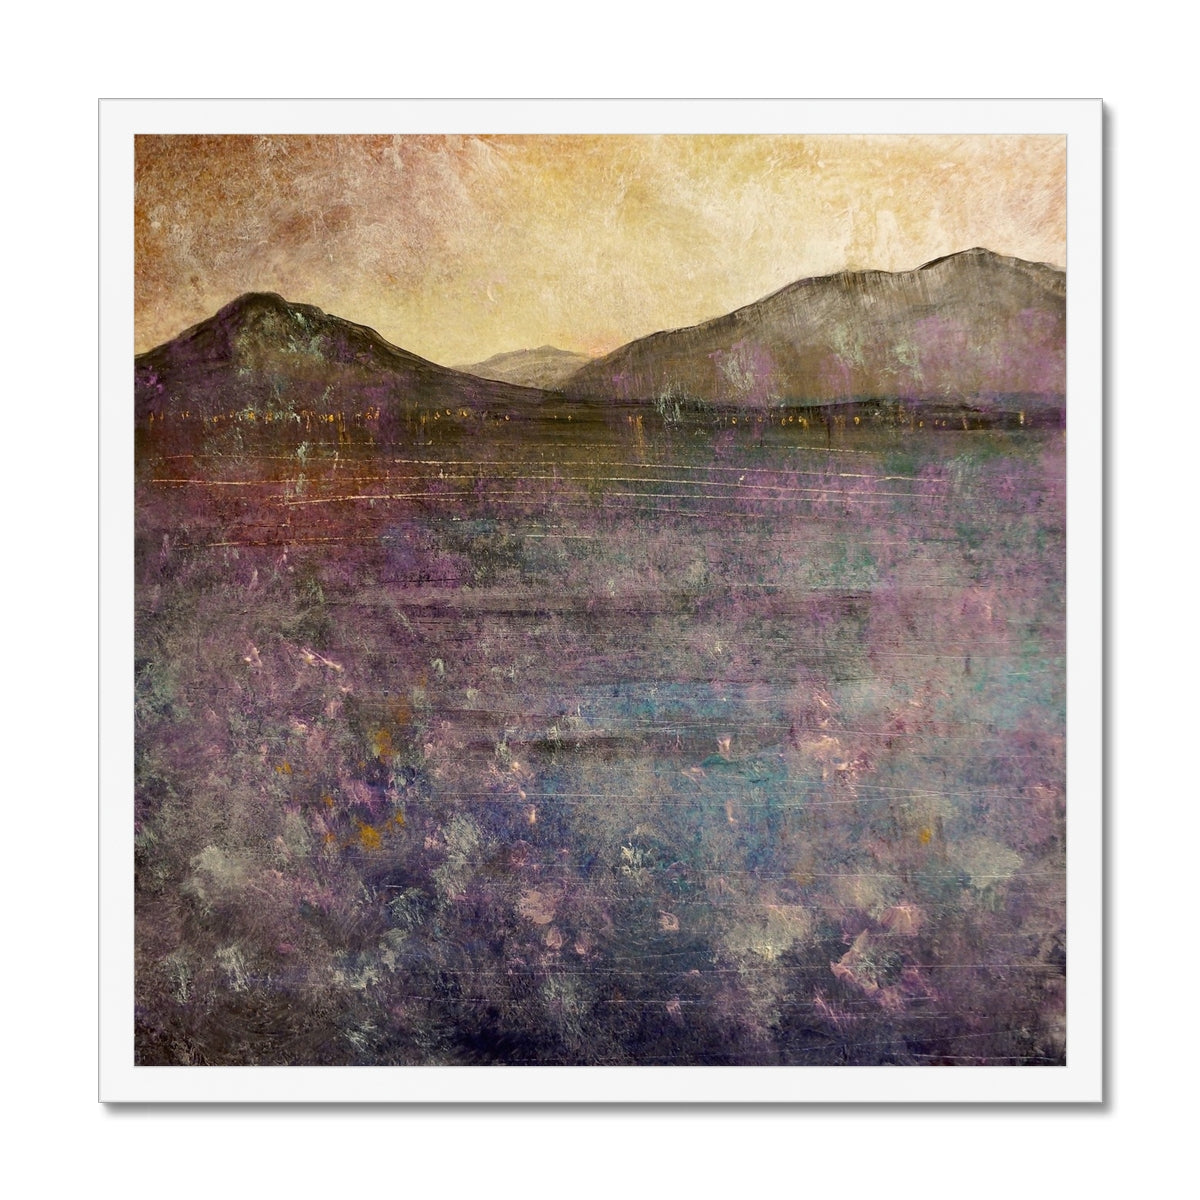 River Clyde Winter Dusk Painting | Framed Prints From Scotland-Framed Prints-River Clyde Art Gallery-20"x20"-White Frame-Paintings, Prints, Homeware, Art Gifts From Scotland By Scottish Artist Kevin Hunter